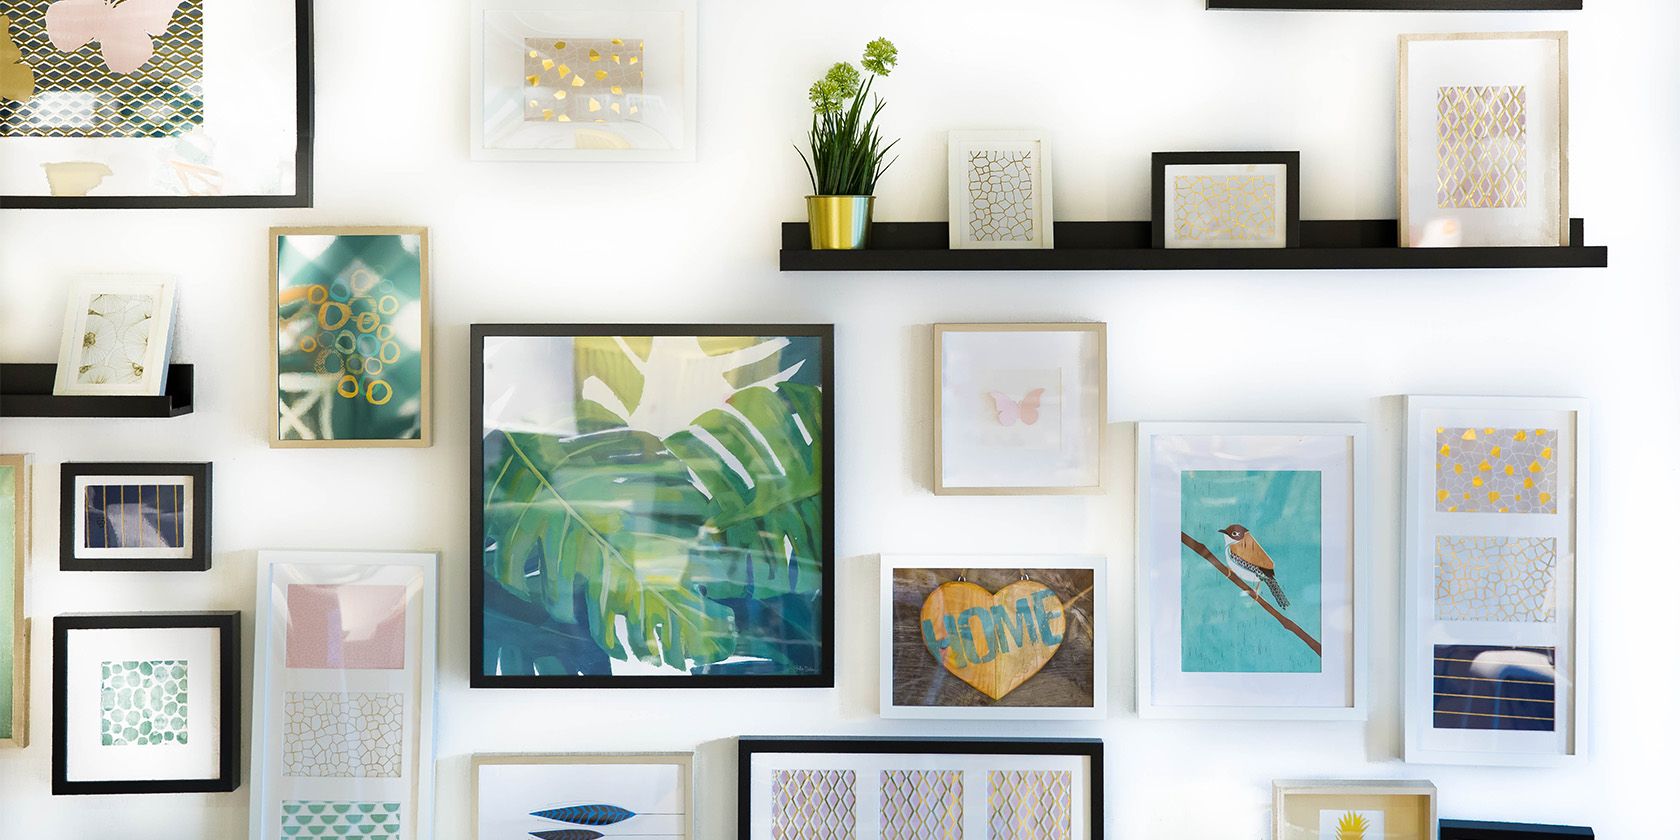 Home Decor and Surface Pattern Designs in Frames on a Wall